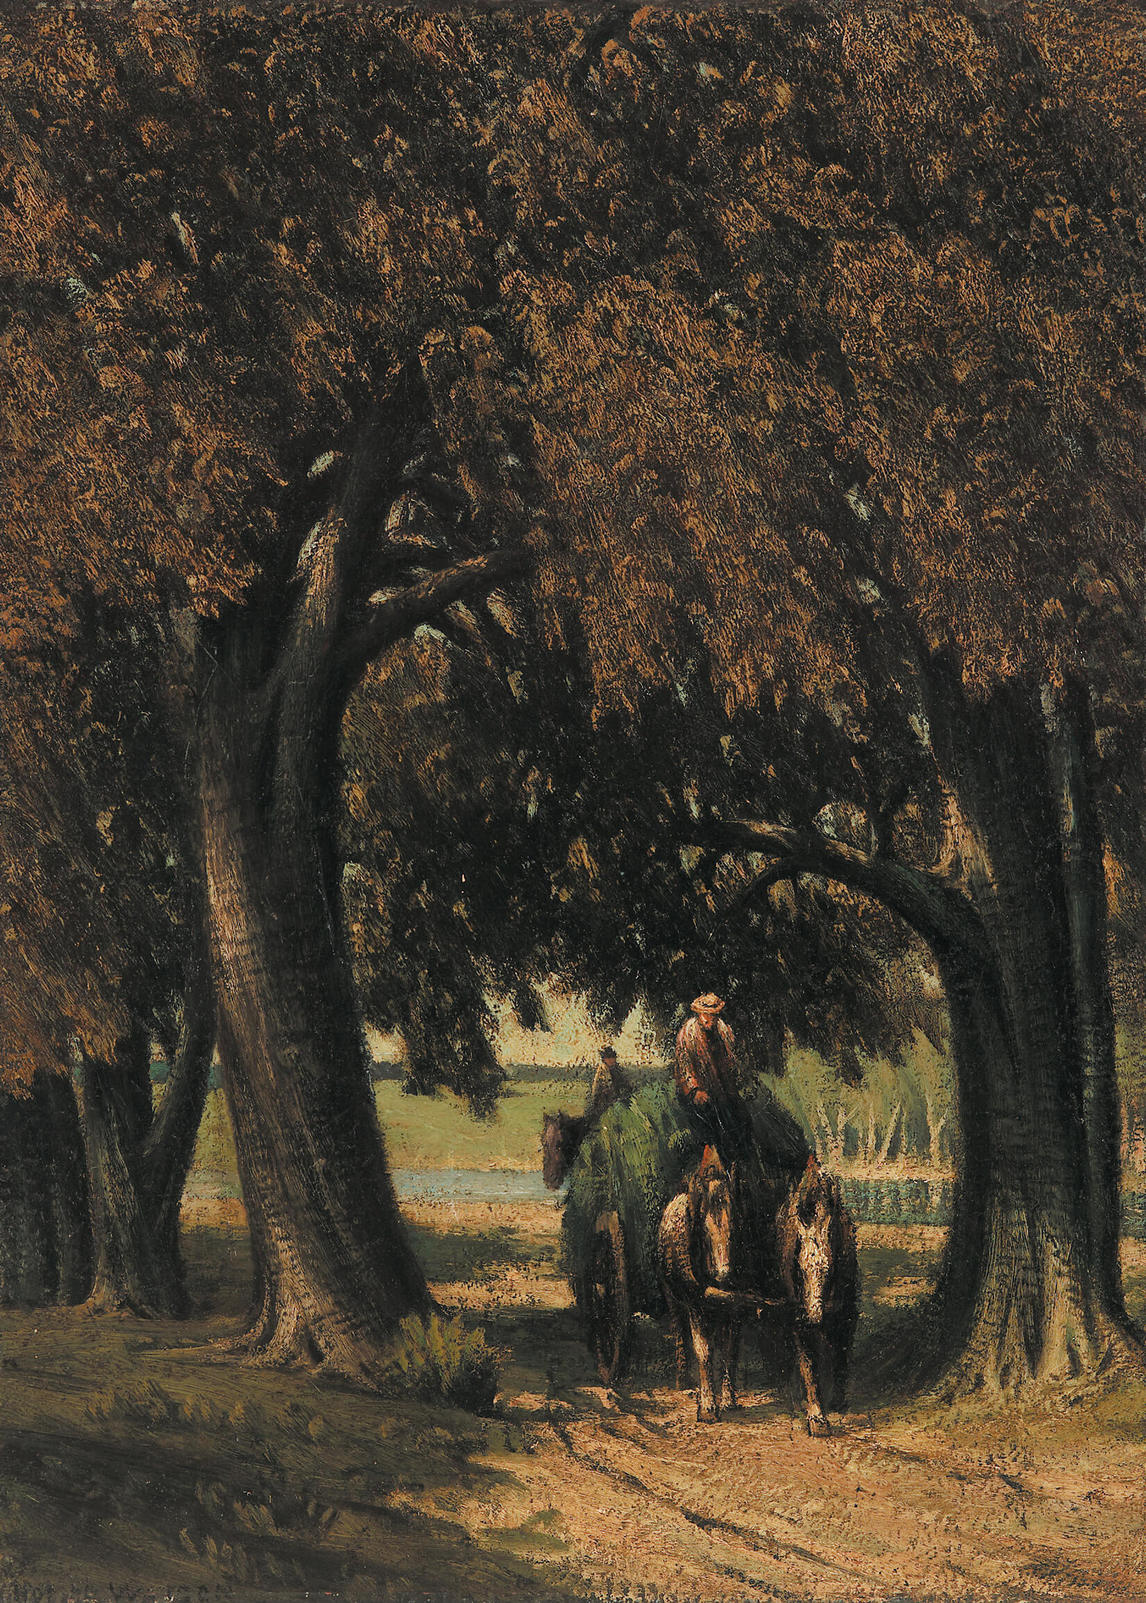 The Load of Grass (Le chargement d’herbe), 1898, par Homer Watson